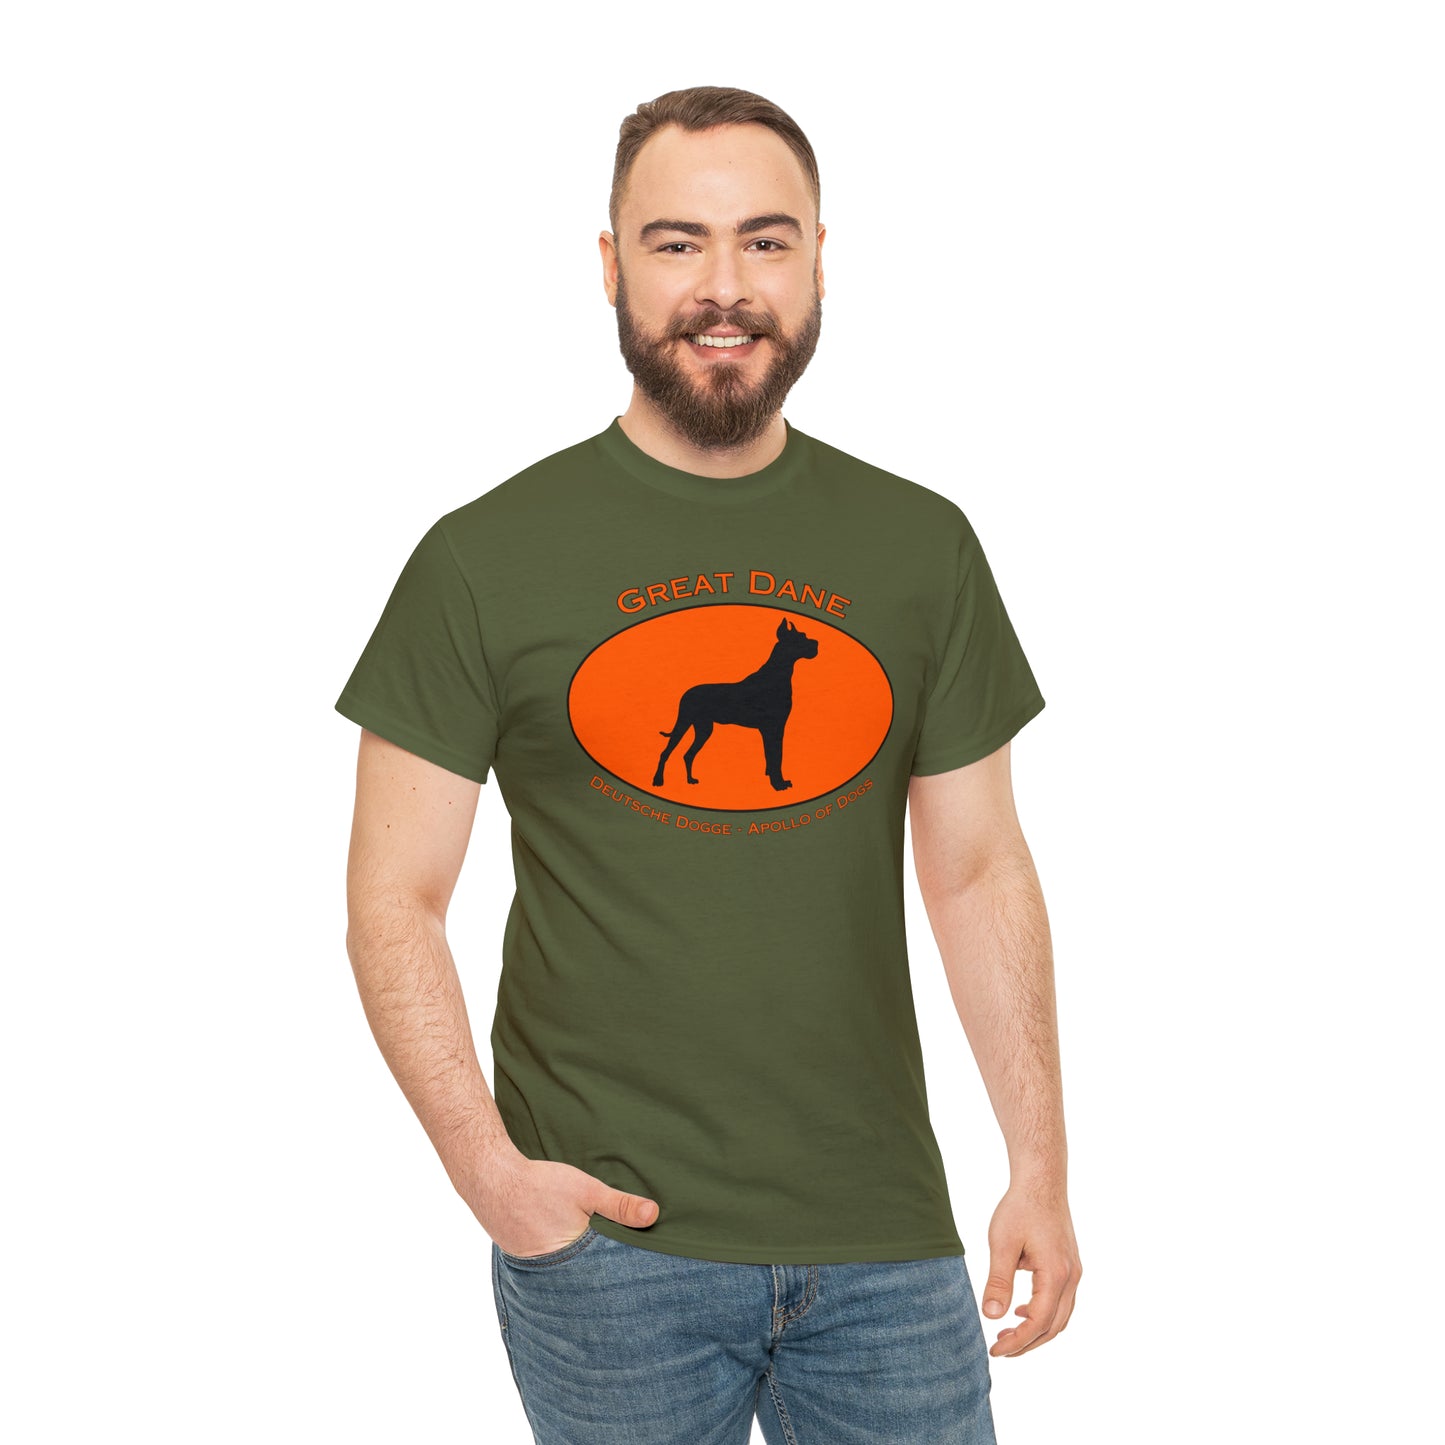 Great Dane (Apollo of Dogs) T-shirt